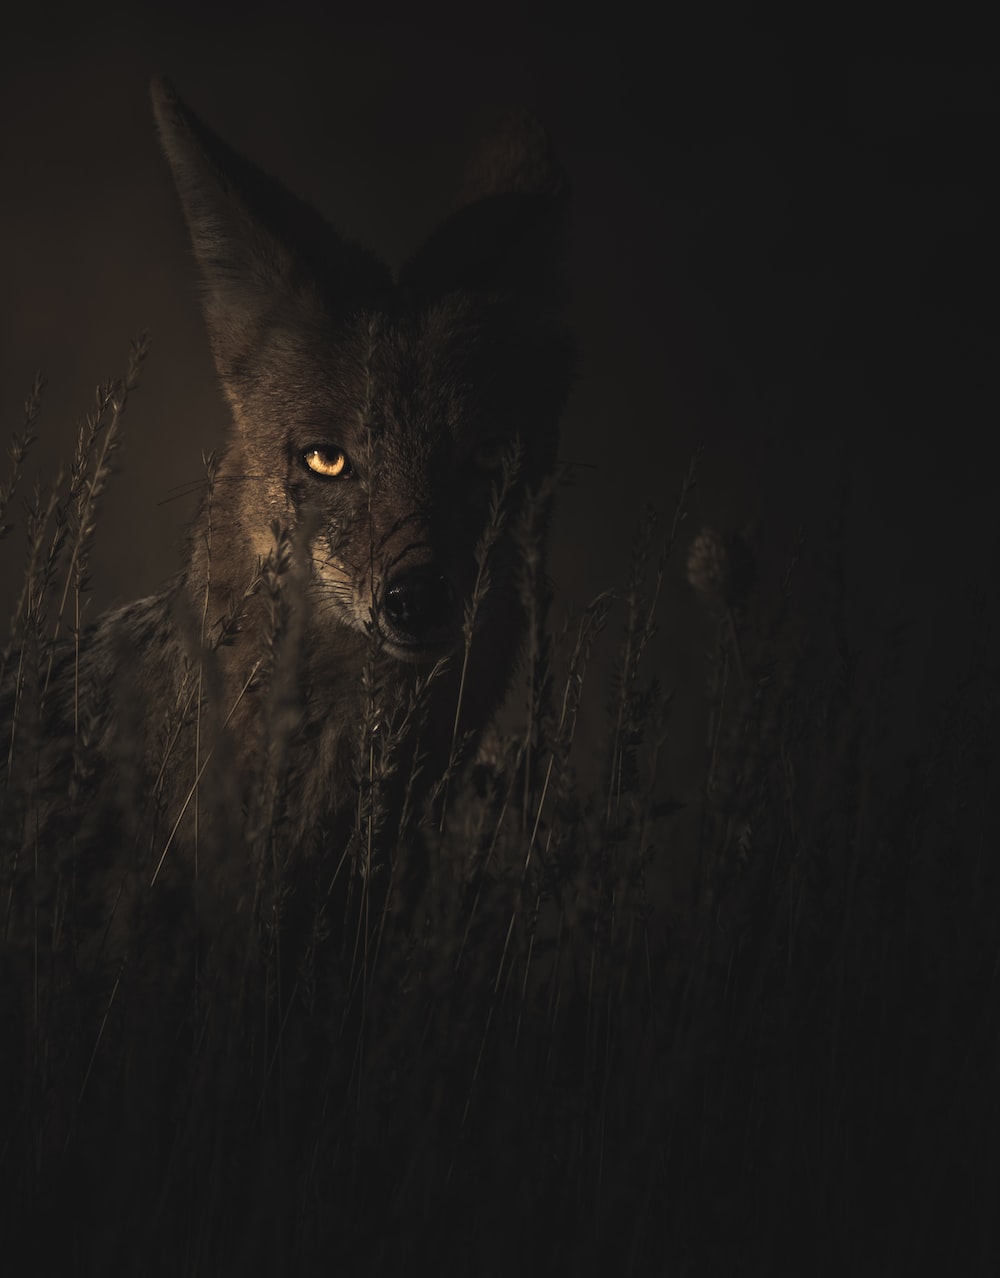 Black Fox Picture. Download Free Image